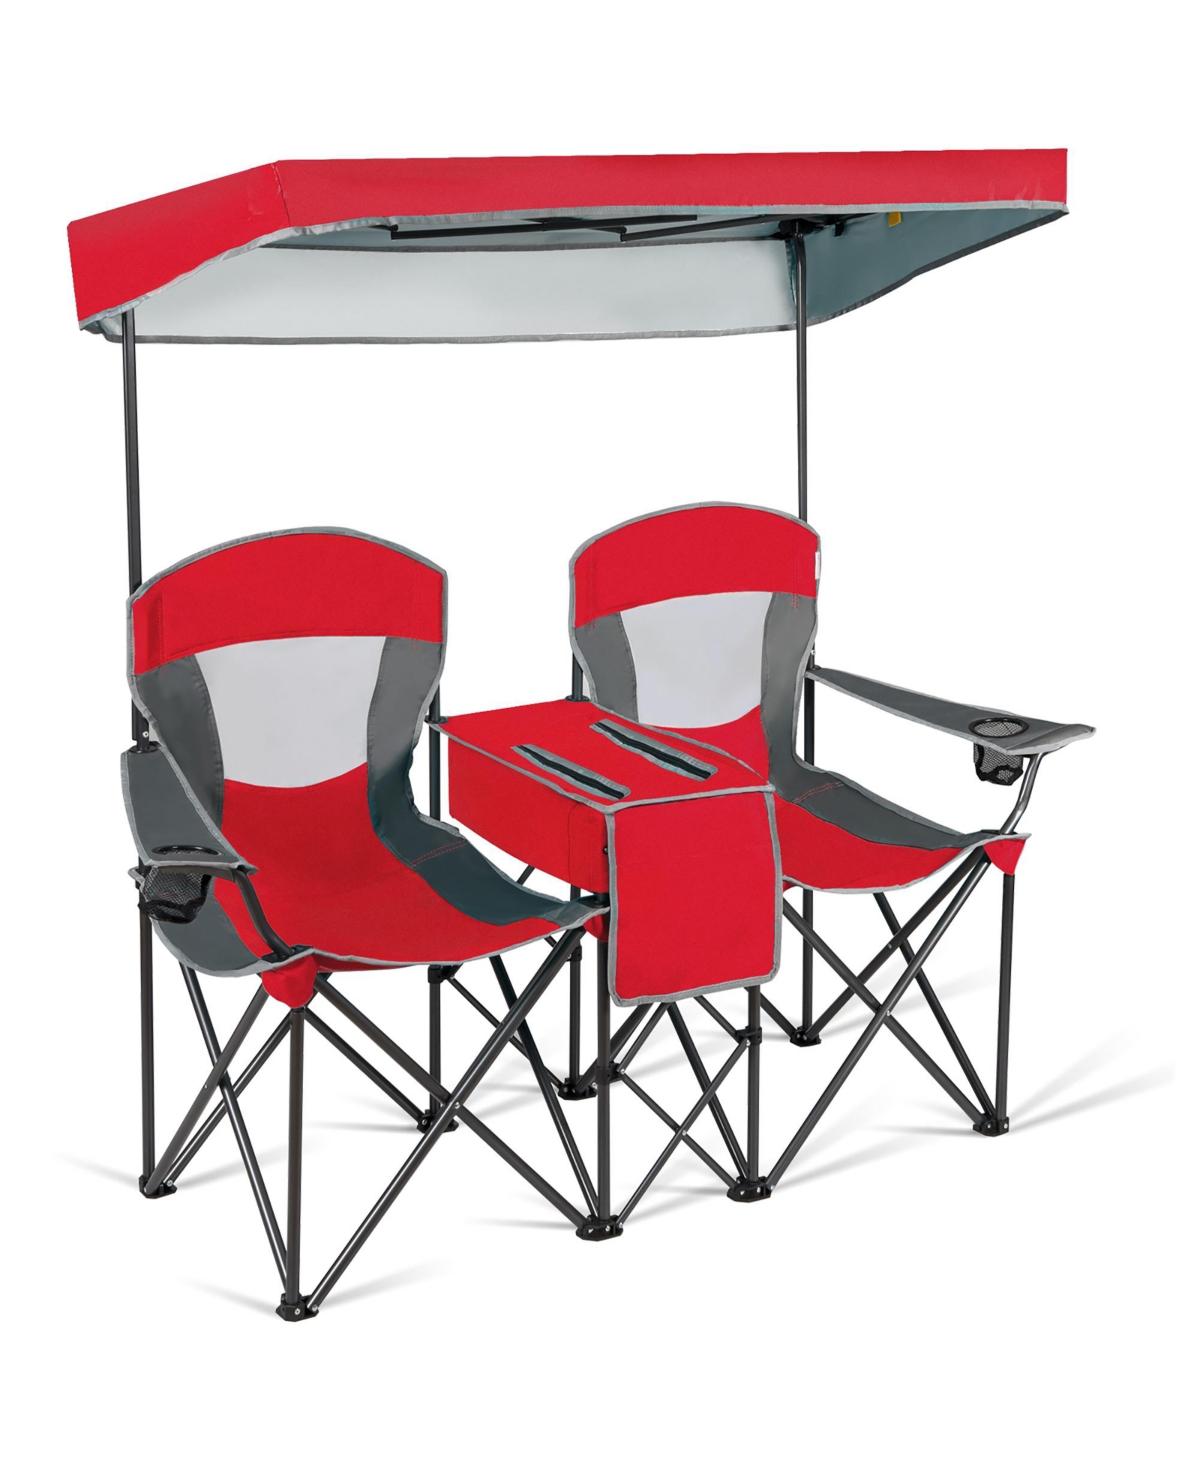 Portable Folding Camping Canopy Chairs w/ Cup Holder Cooler - Red